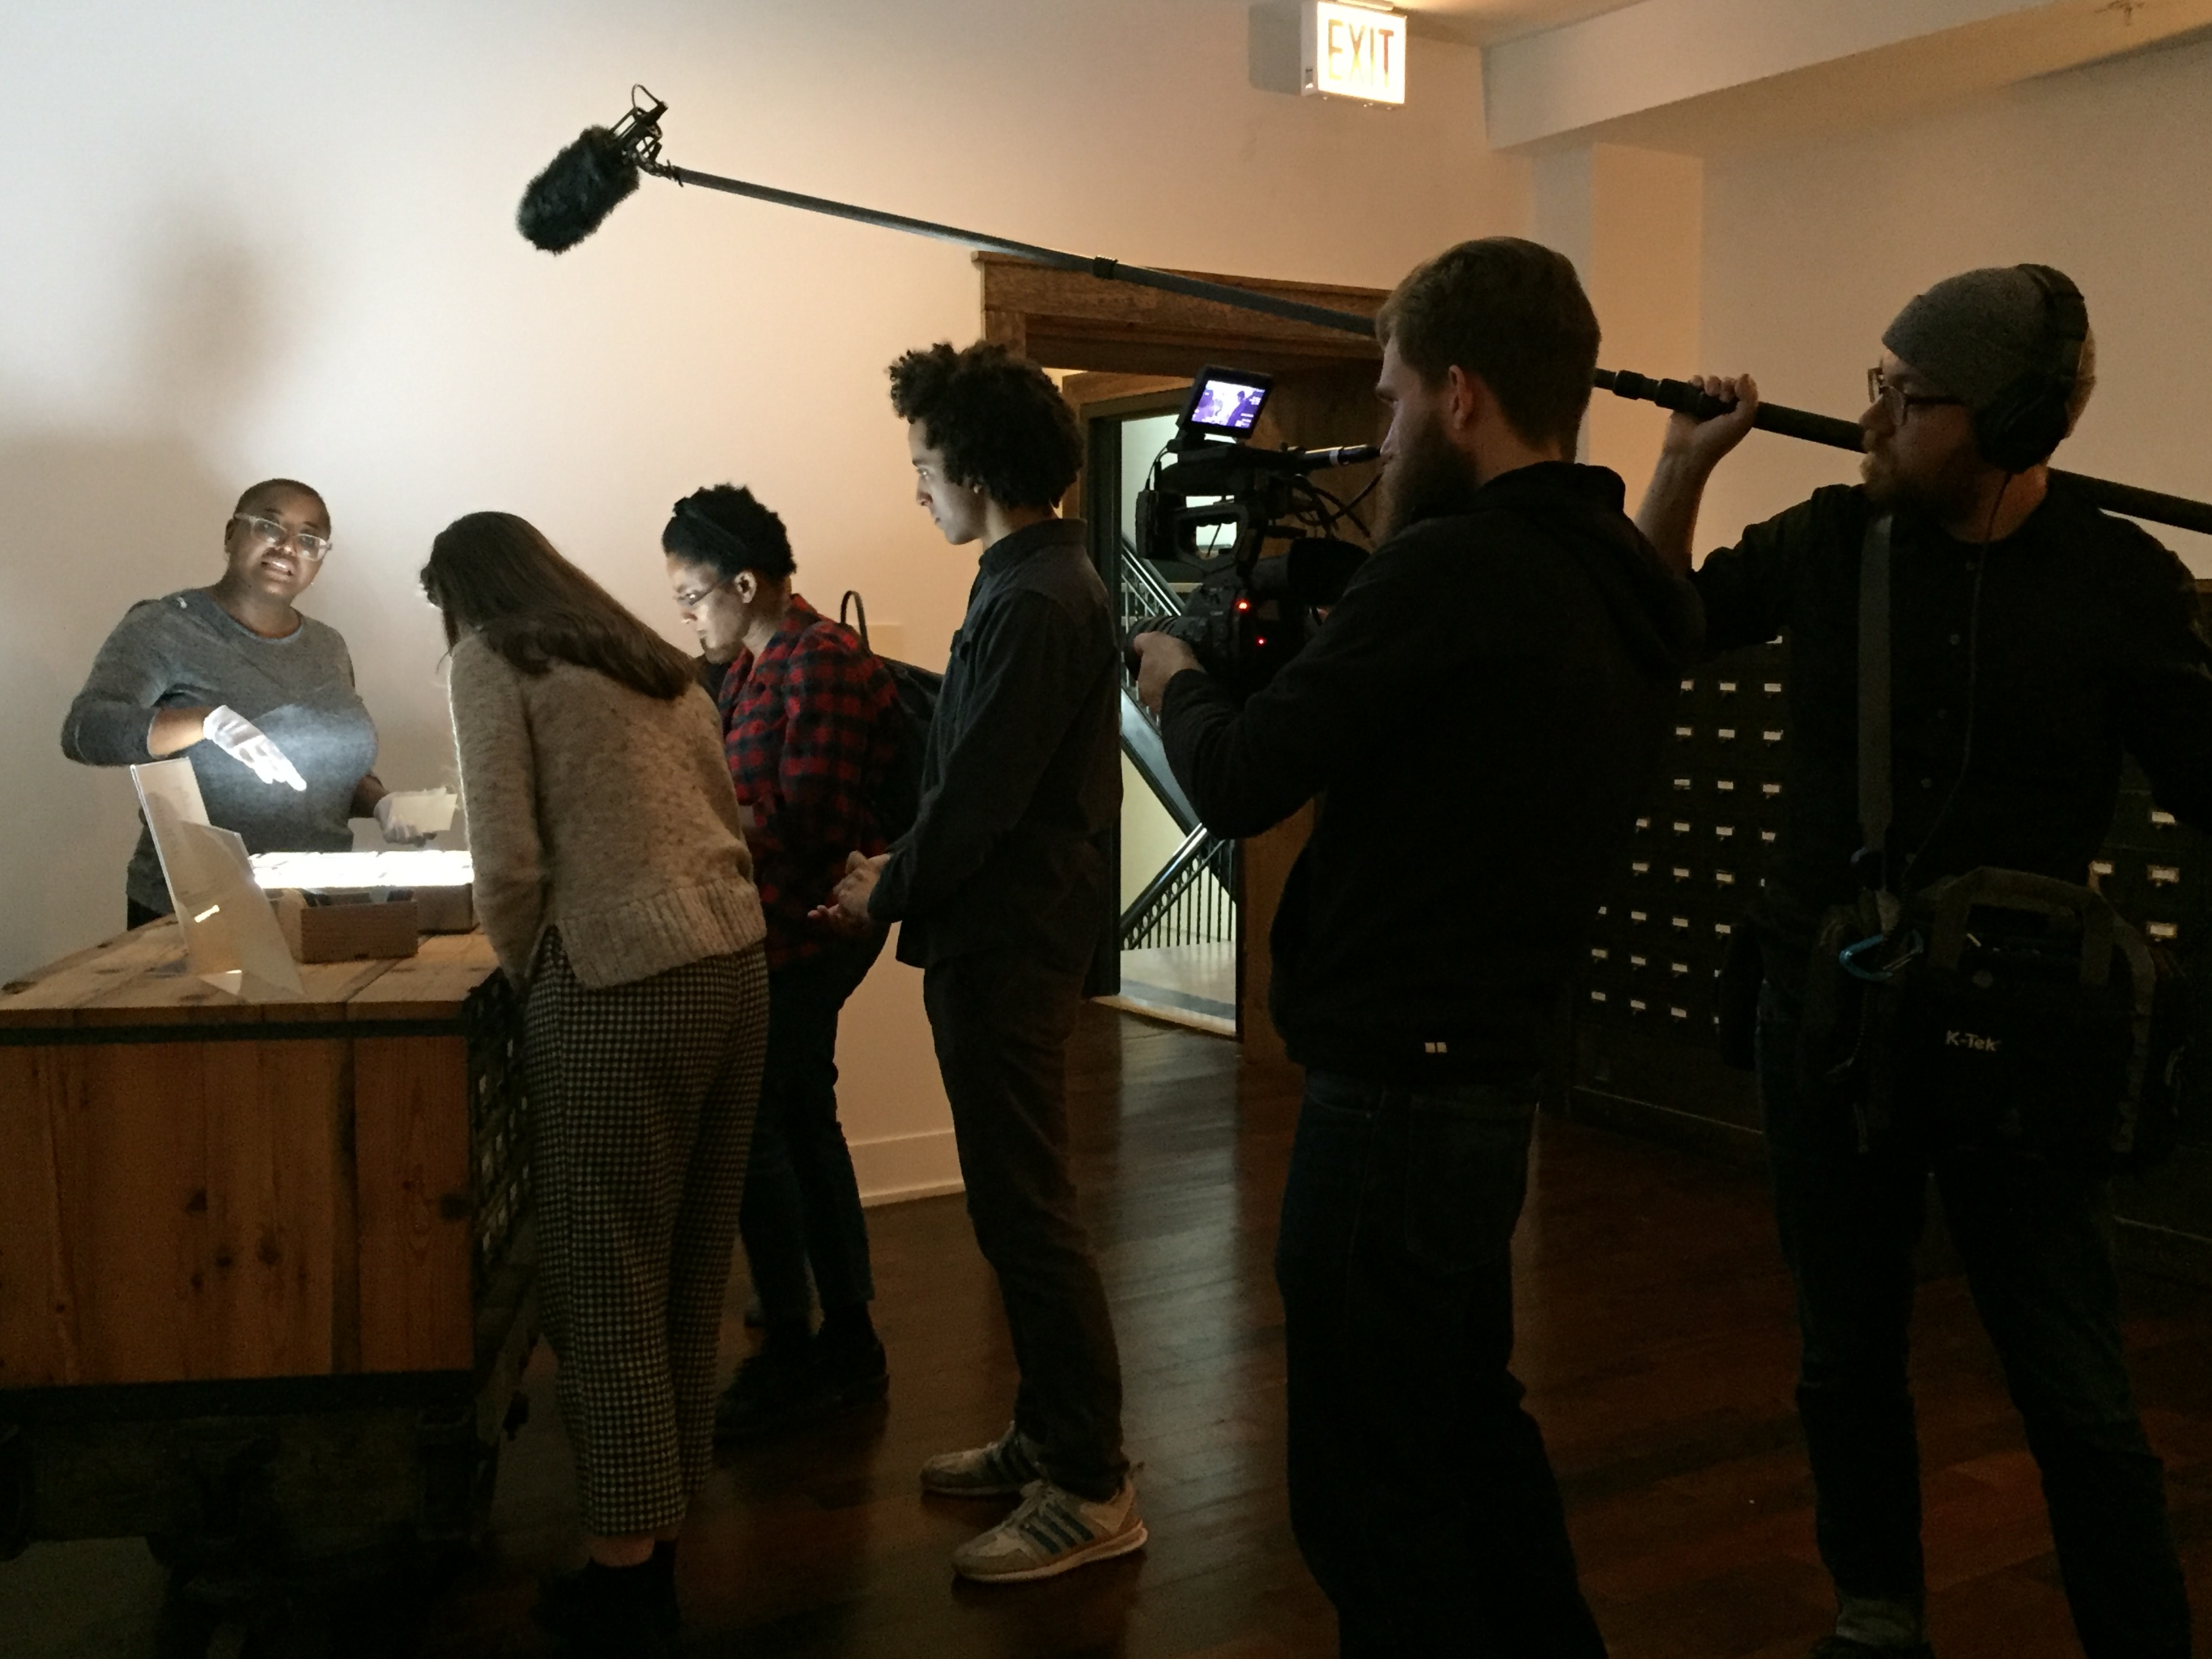 ART21 filming at Theaster Gates’s Stony Island Arts Bank in Chicago, USA, 2016. Behind the scenes of ART21’s series Art in the Twenty-First Century, Season 8, 2016. Photo: Brian Ashby. © ART21, Inc. 2016.